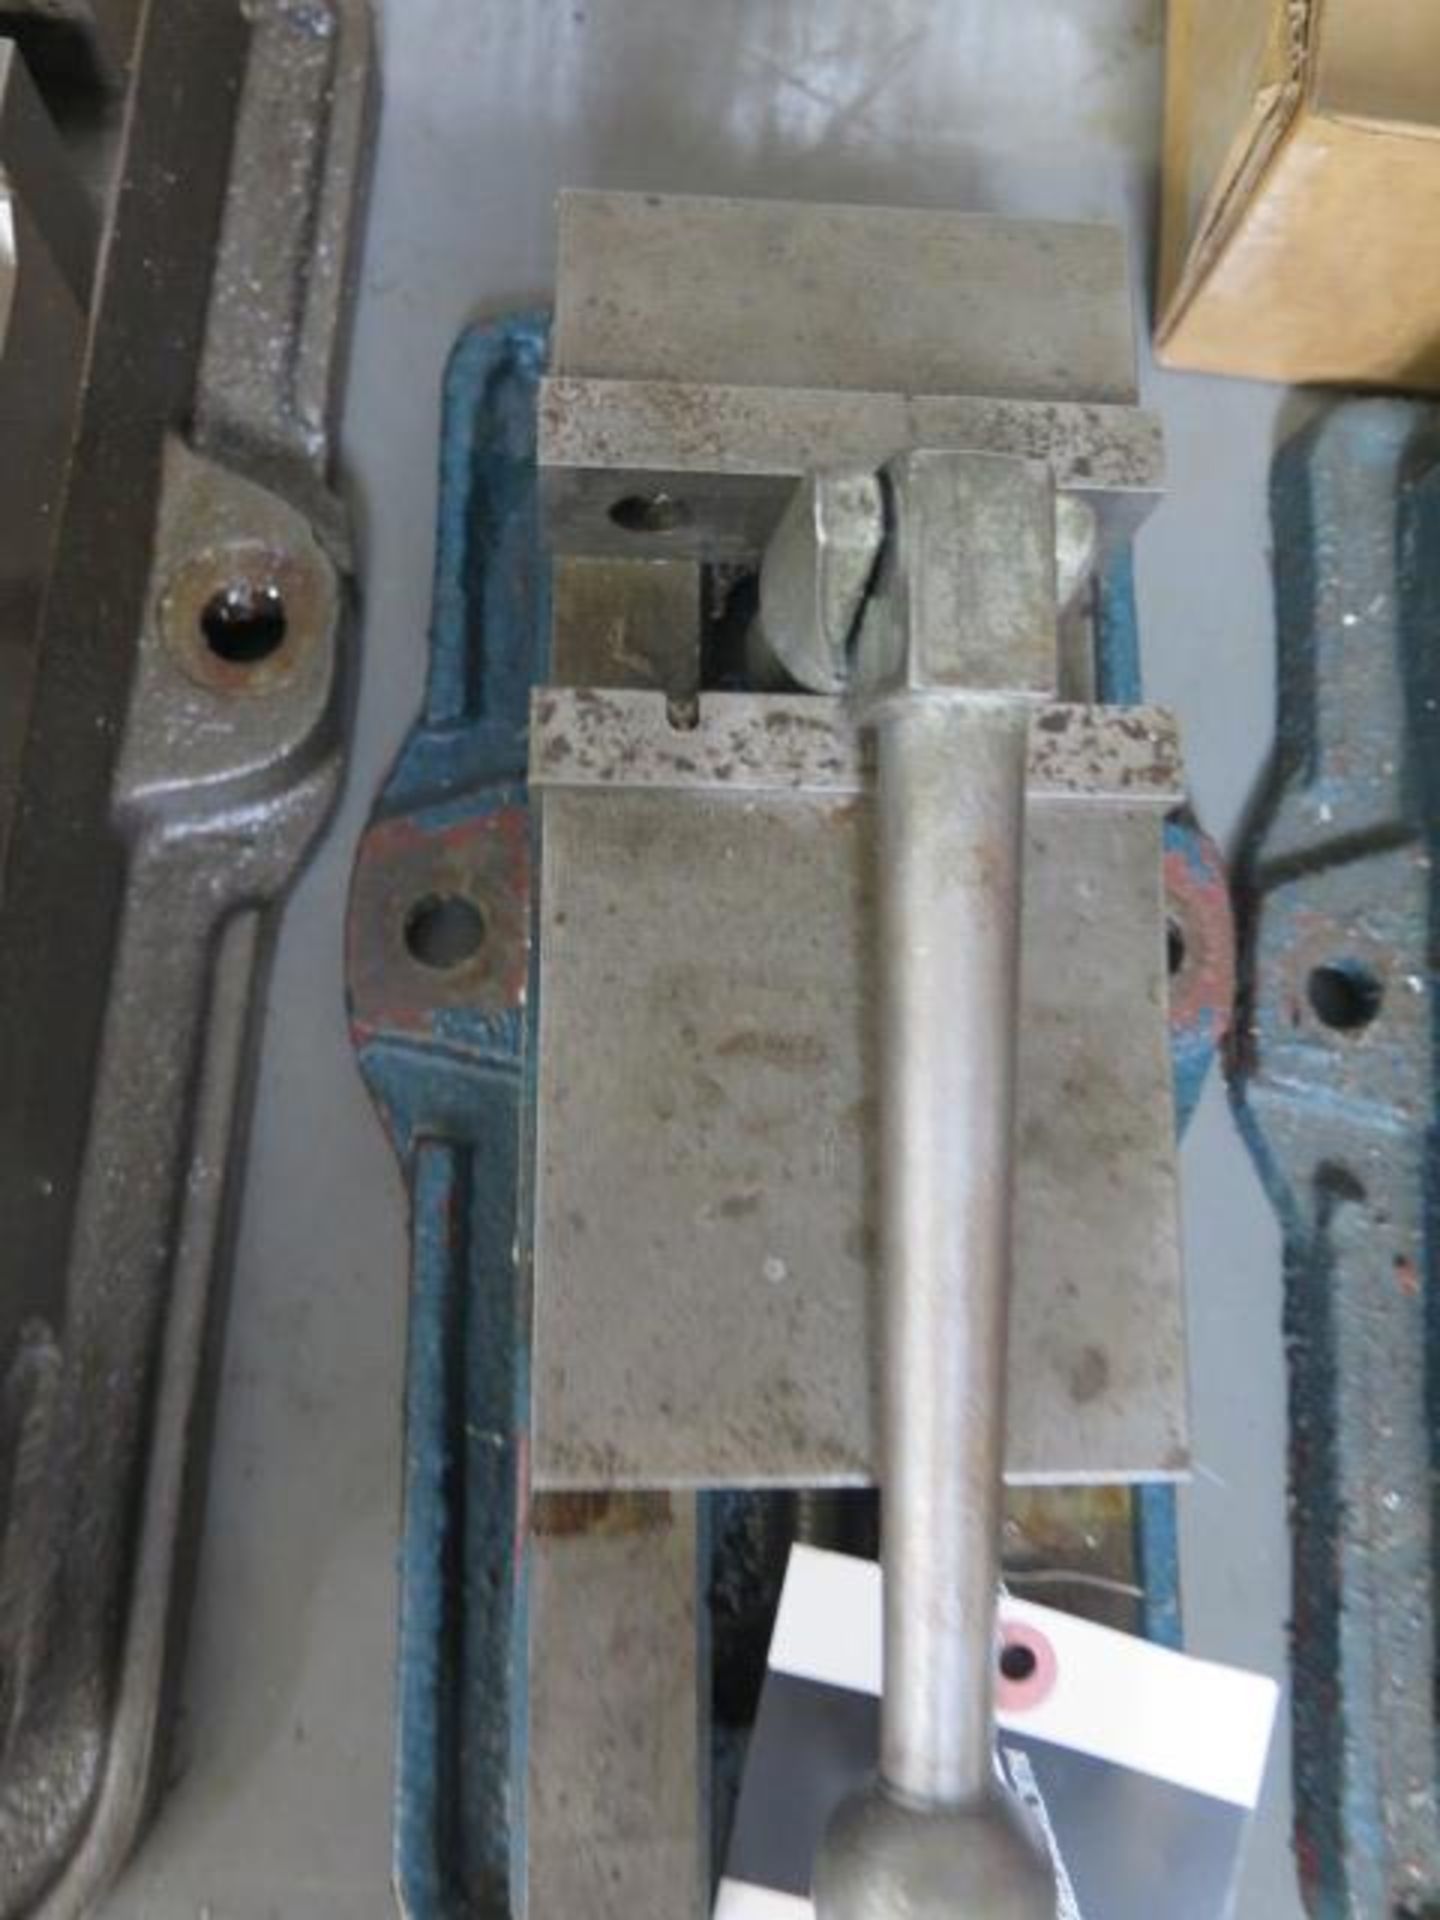 4" Angle-Lock Vises (2) (1 is Broken) (SOLD AS-IS - NO WARRANTY) - Image 2 of 7